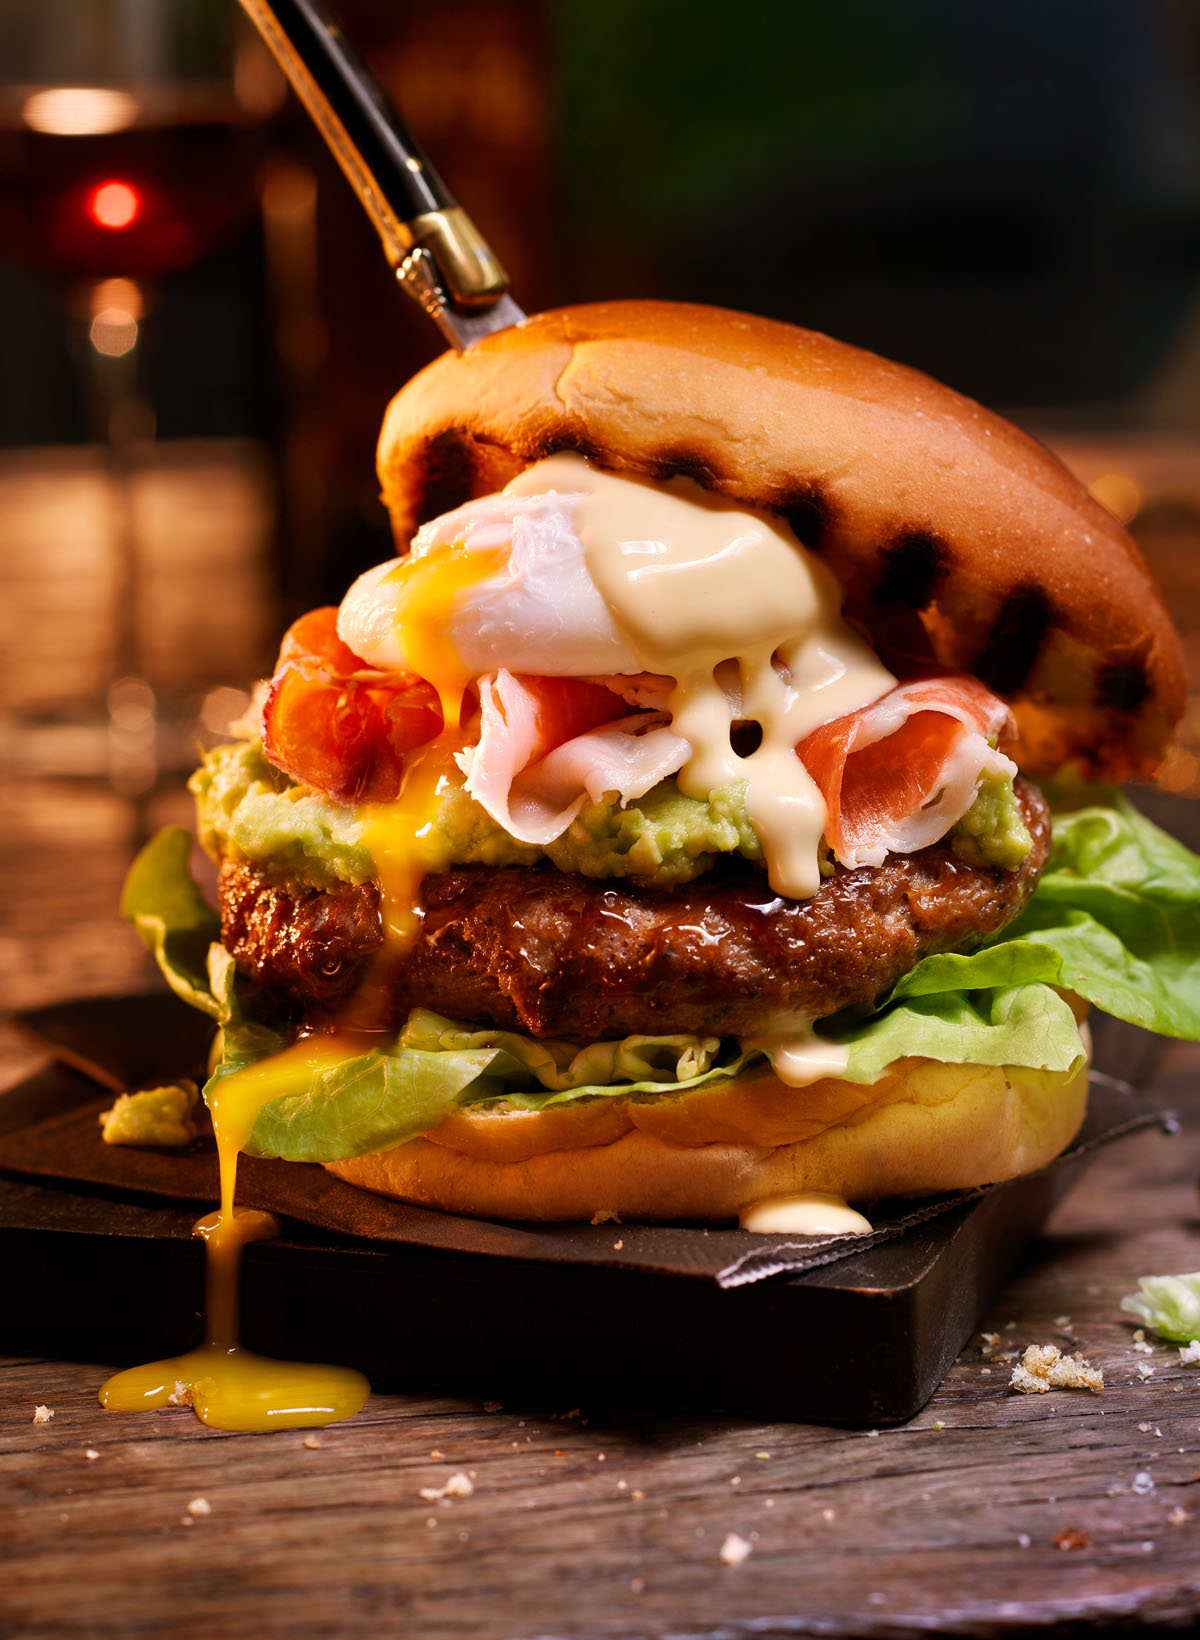 Picture of delicious hamburger with lettuce, beef patty, guacamole, prosciutto, poached egg with yolk oozing out and sauce on top with a knife sticking through the top bun in a ambiance setting of dark wood and black cutting board with blurry background